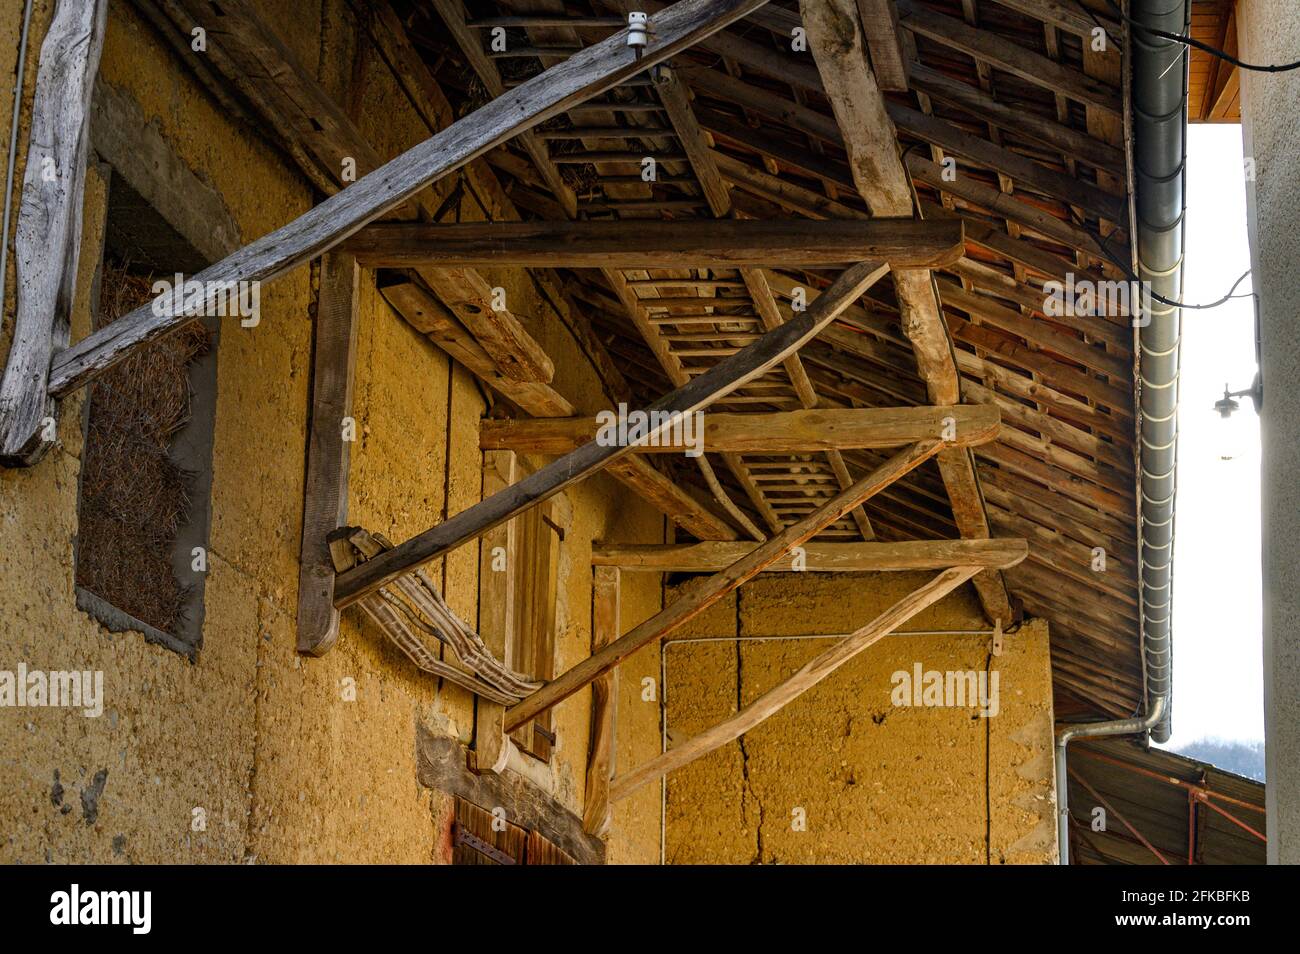 Wooden support structure used for supporting the weight of roof. Stock Photo